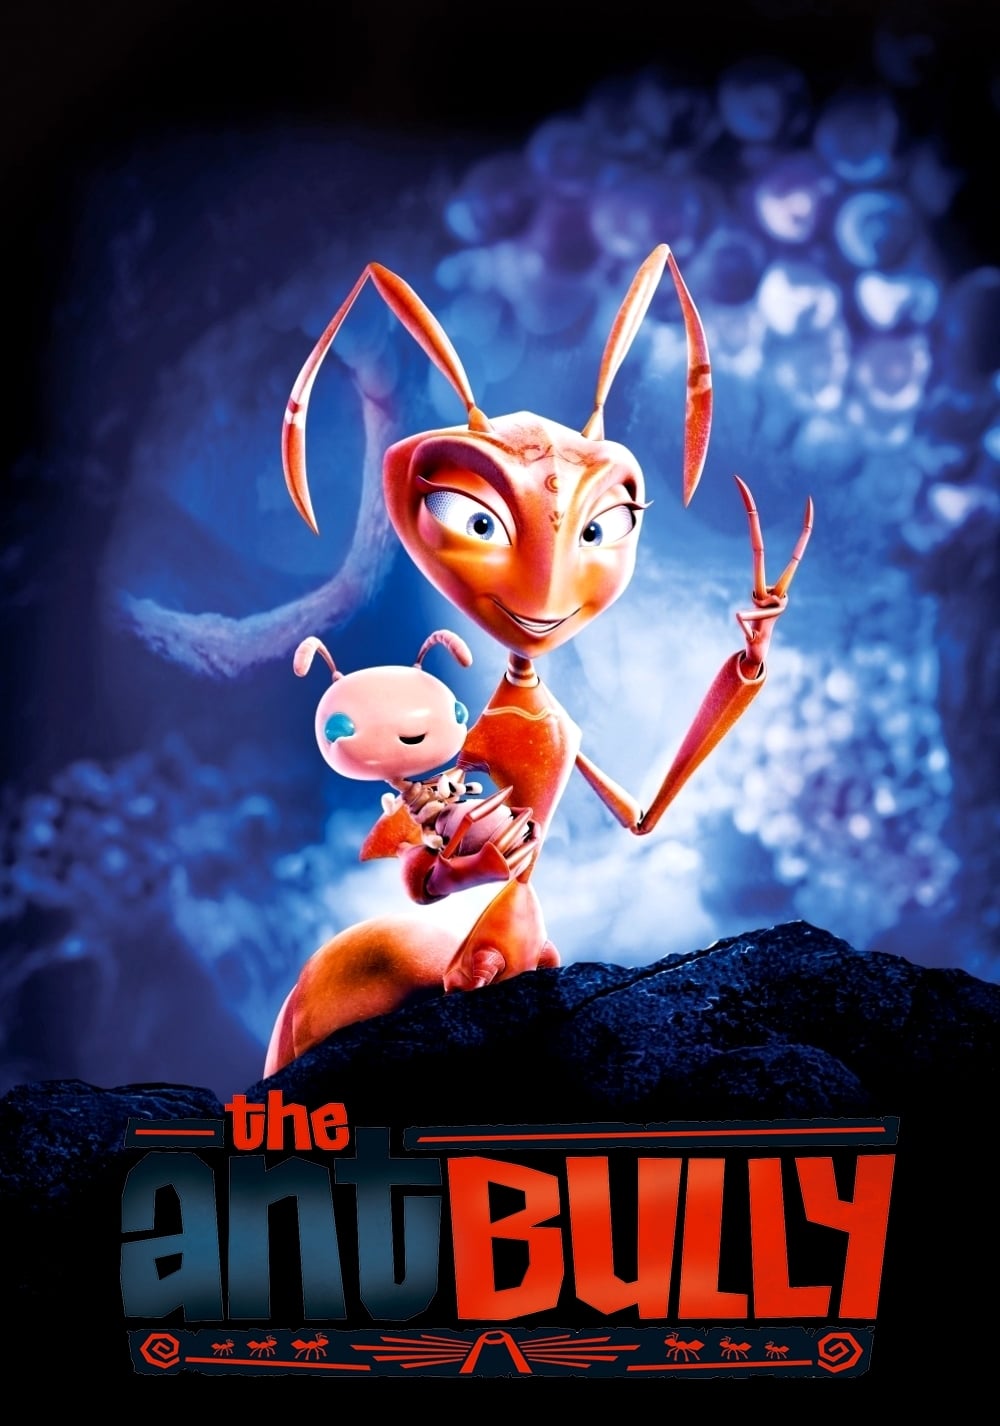 The Ant Bully 2006 Posters - Movie Database TMDb.